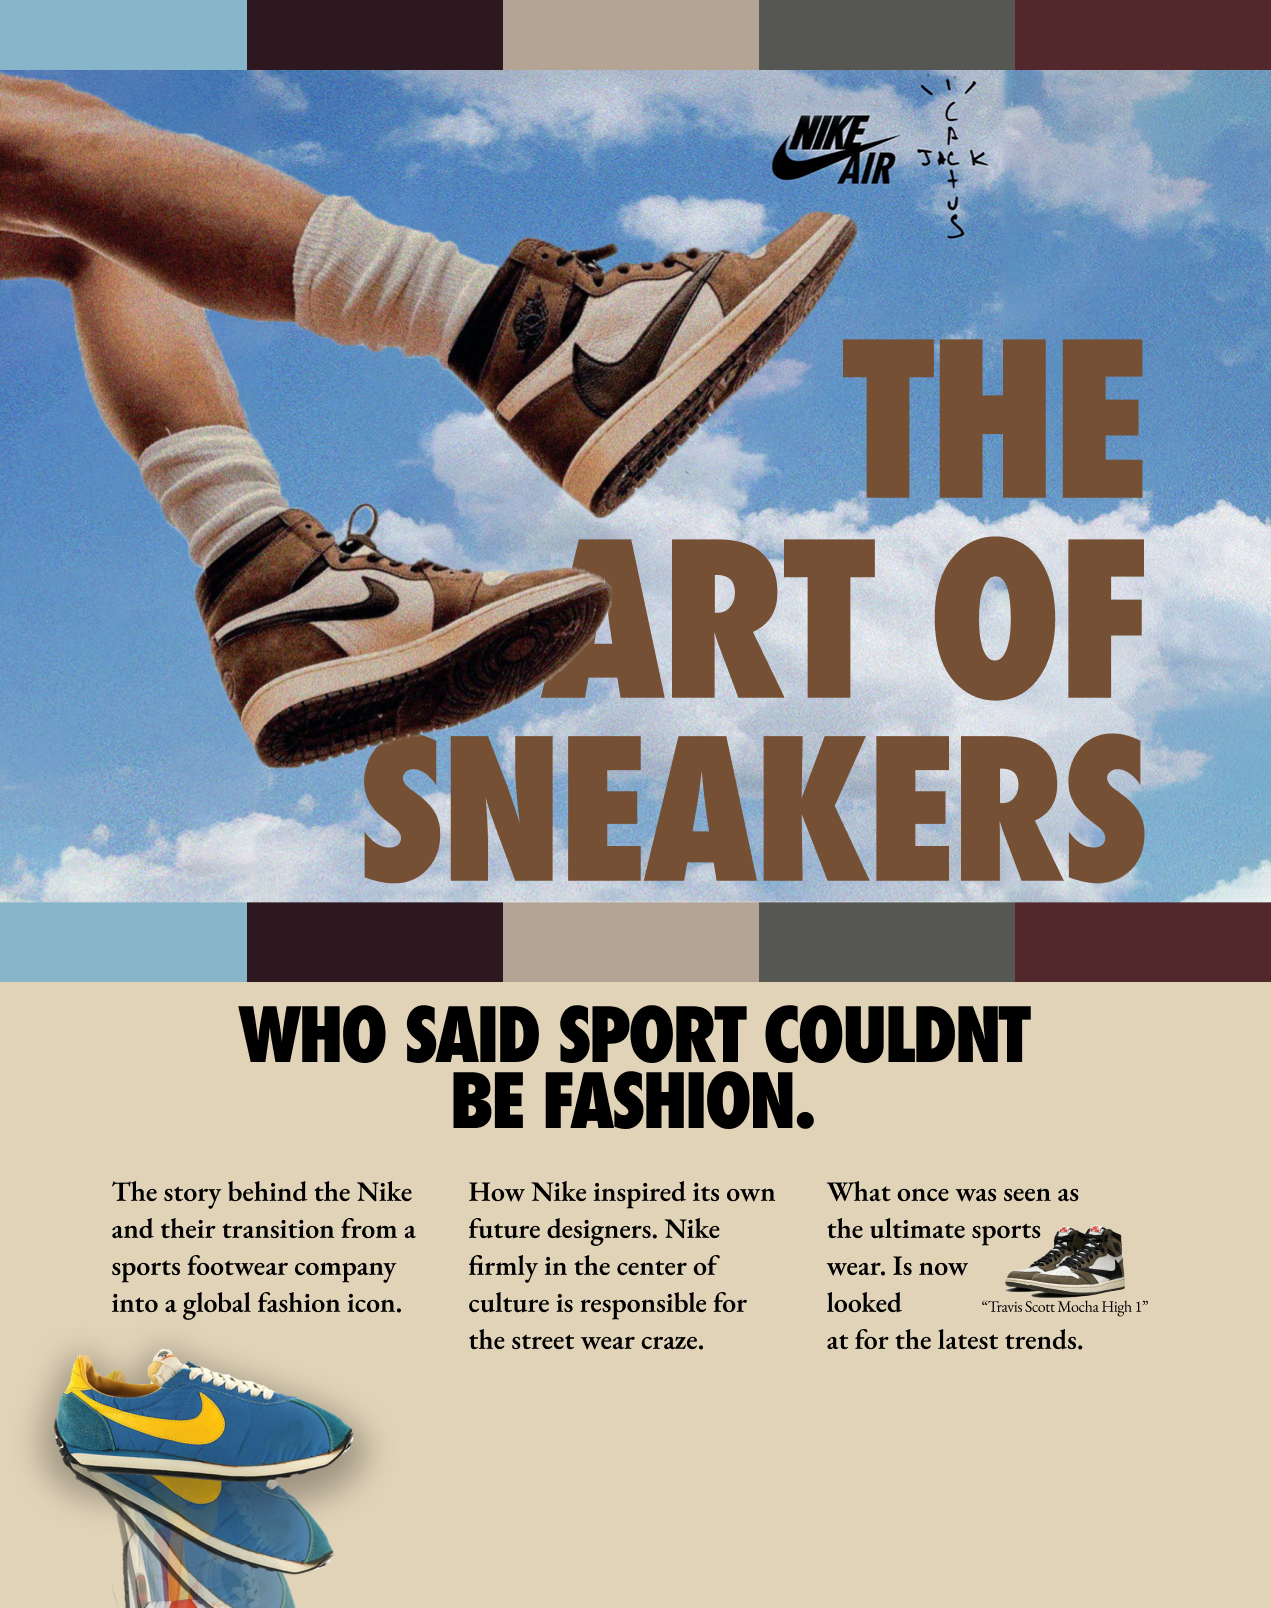 A graphic poster promoting the story of the Nike Sneaker designer. There is an image of legs wearing nike in the air.